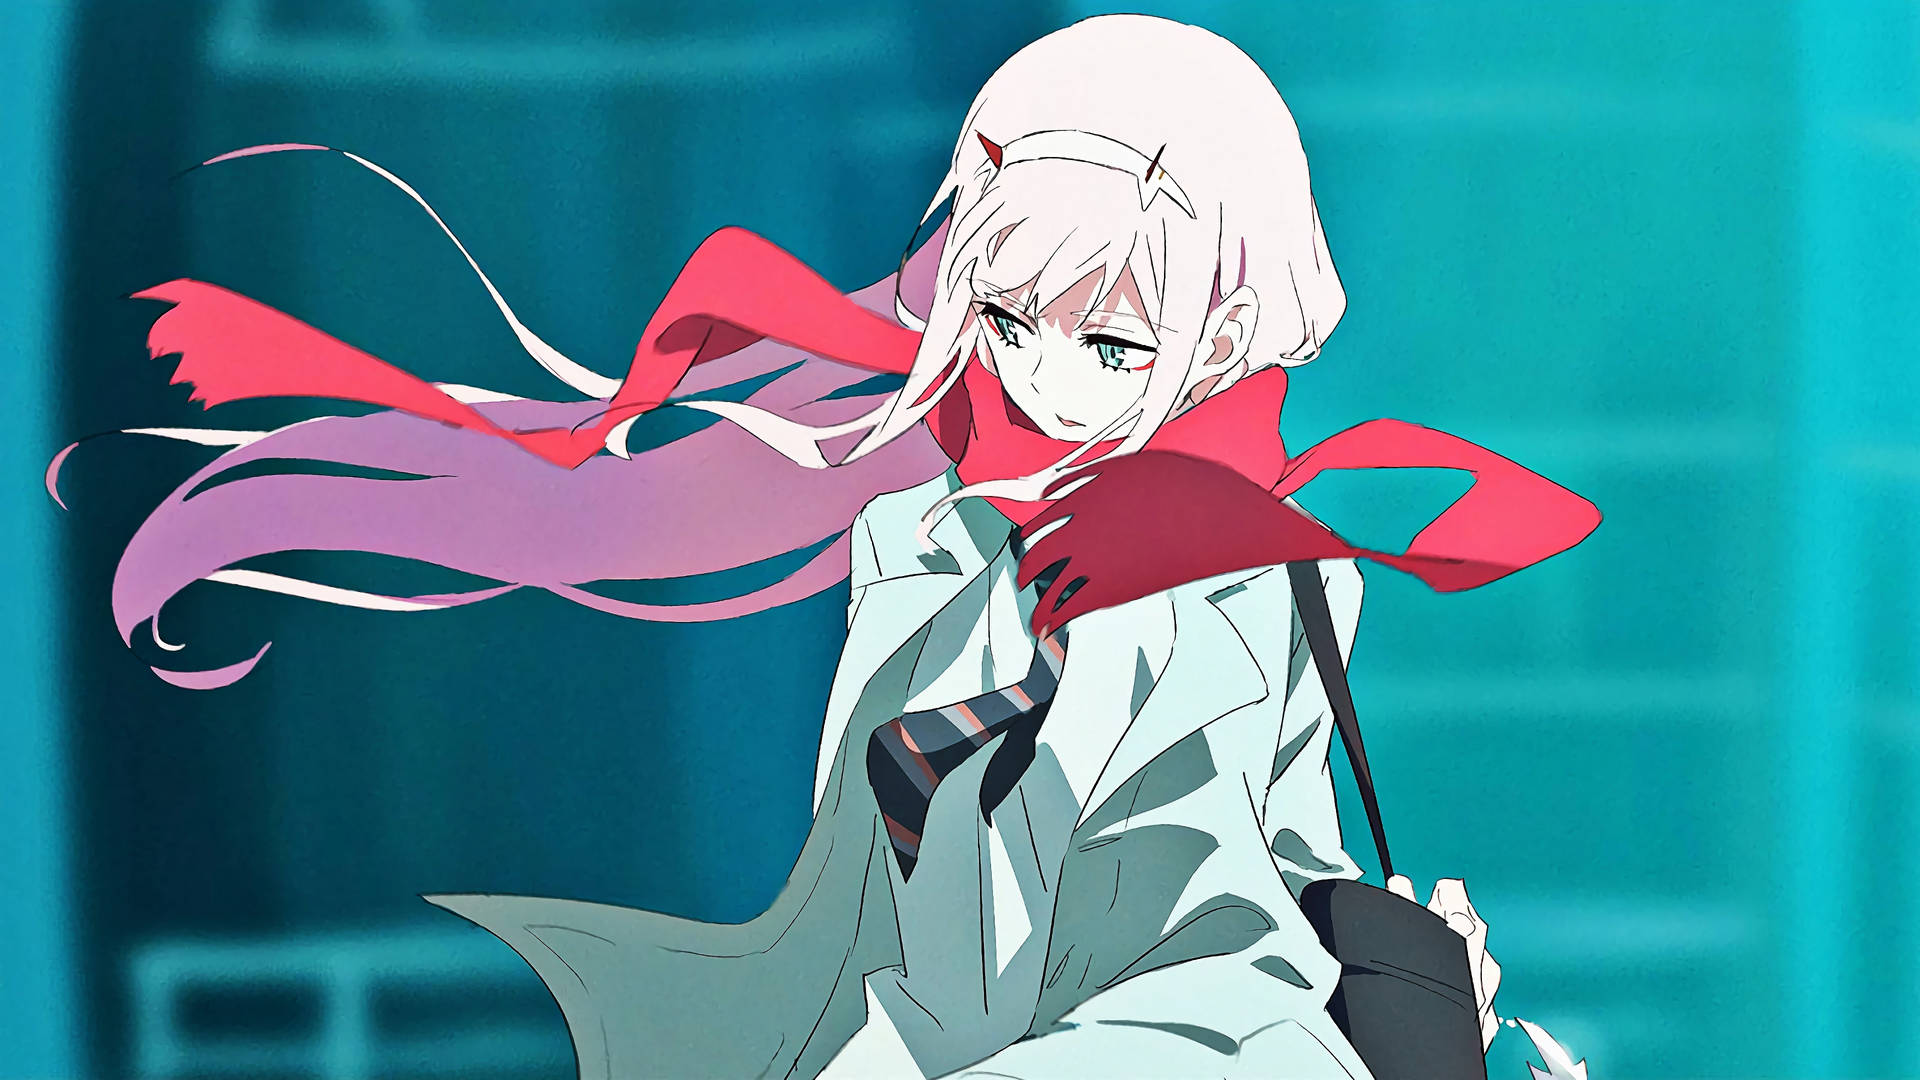 Zero Two, the protagonist from the anime DARLING in the FRANXX Wallpaper